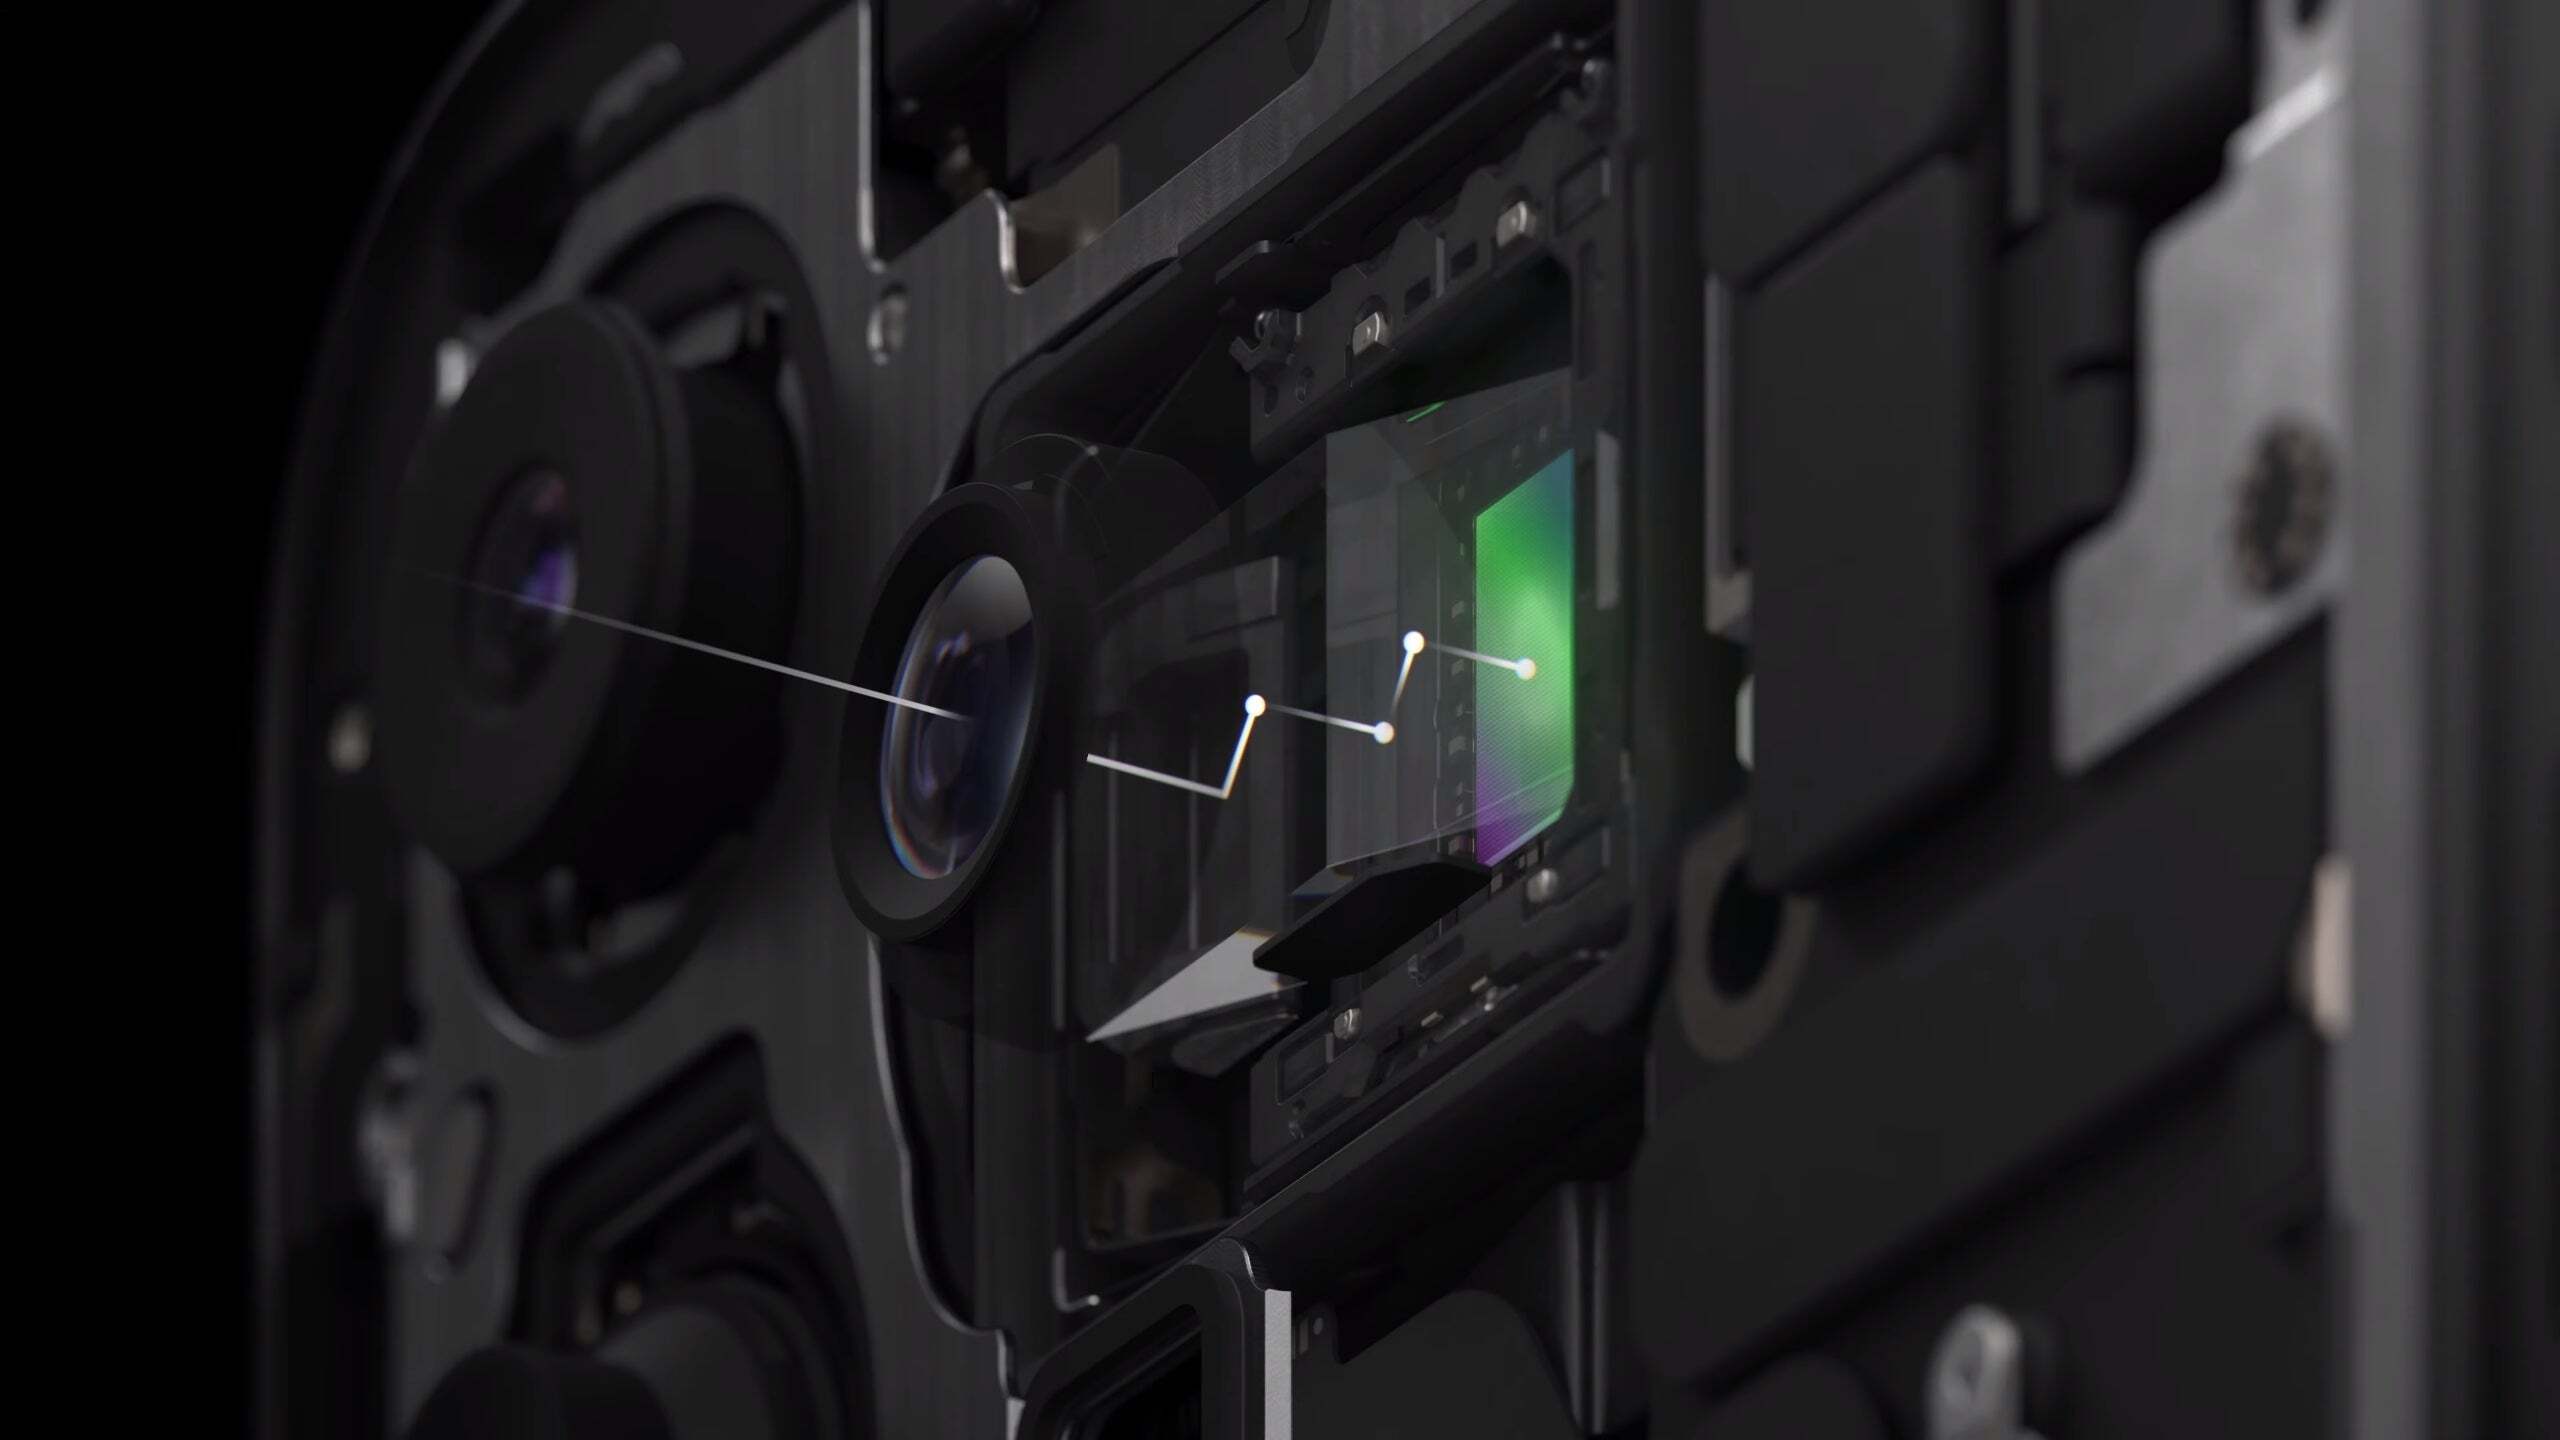 That&#039;s the tetraprism camera design that&#039;s found on the iPhone 15 Pro Max. It will arrive on the regular-sized iPhone 16 Pro - iPhone 16 Pro&#039;s two new cameras are coming to prove that cutting-edge hardware is useless